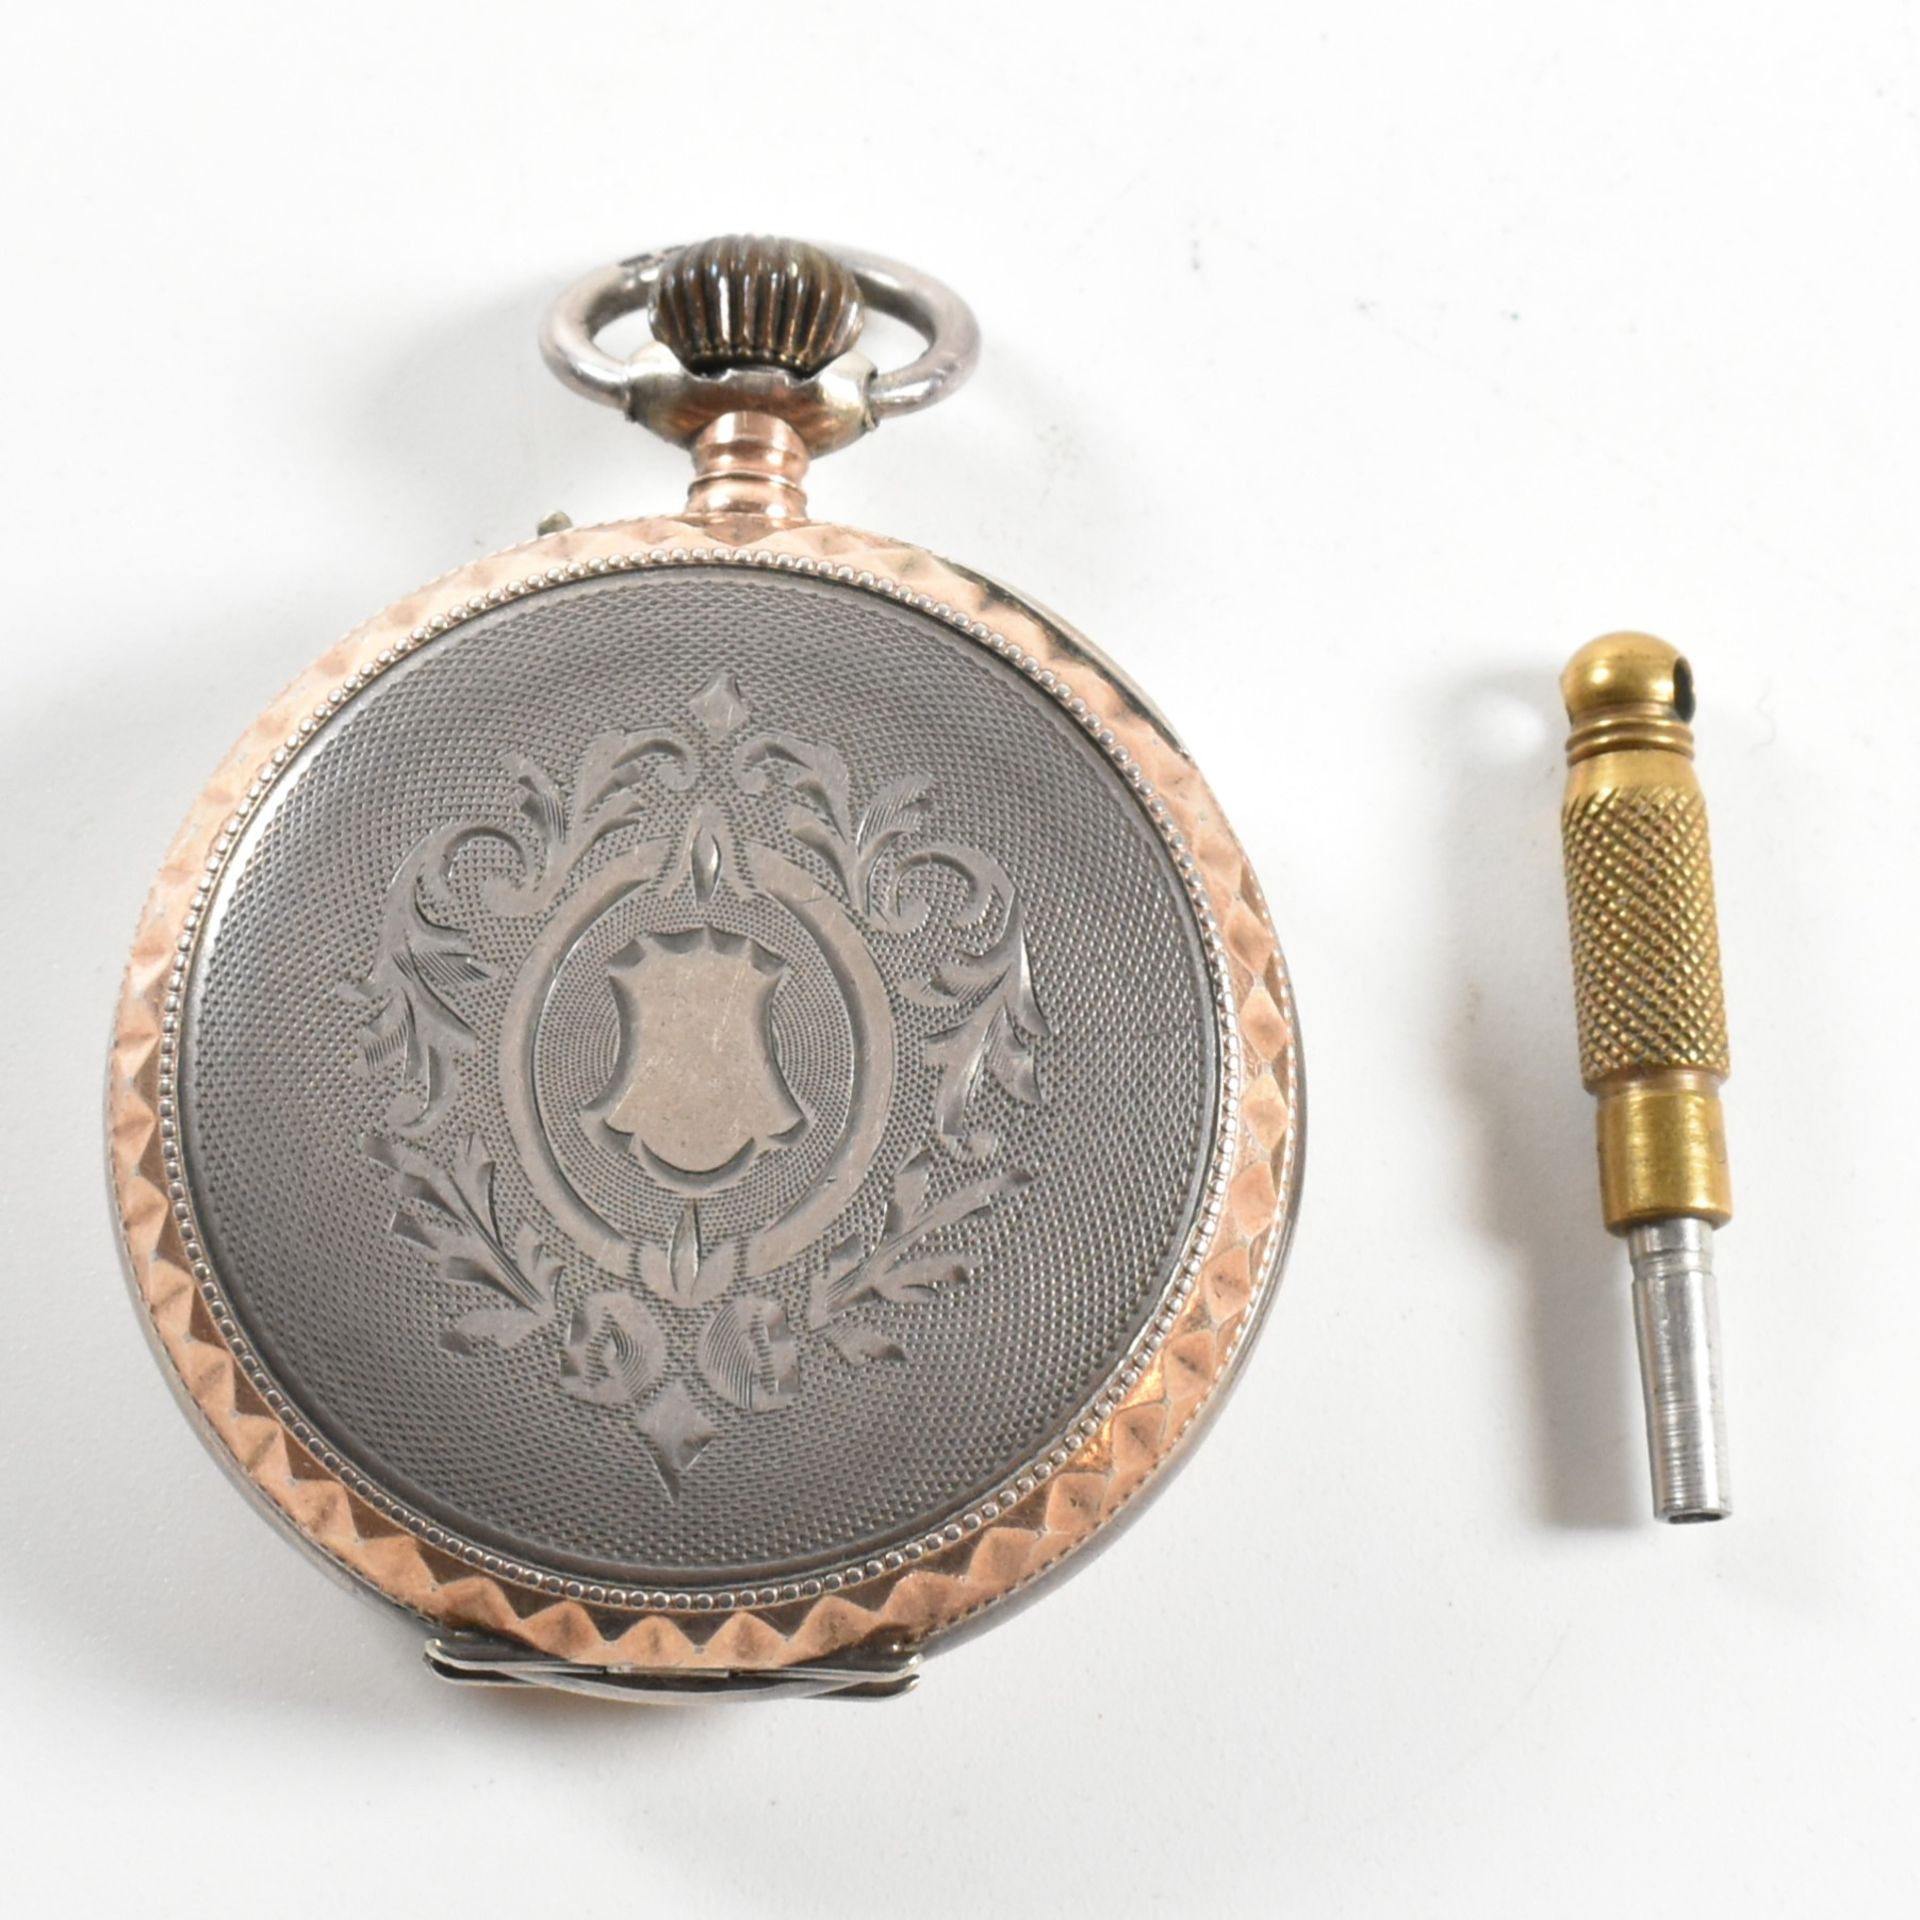 SILVER 800 CONTINENTAL OPEN FACED CROWN WIND POCKET WATCH - Image 2 of 8